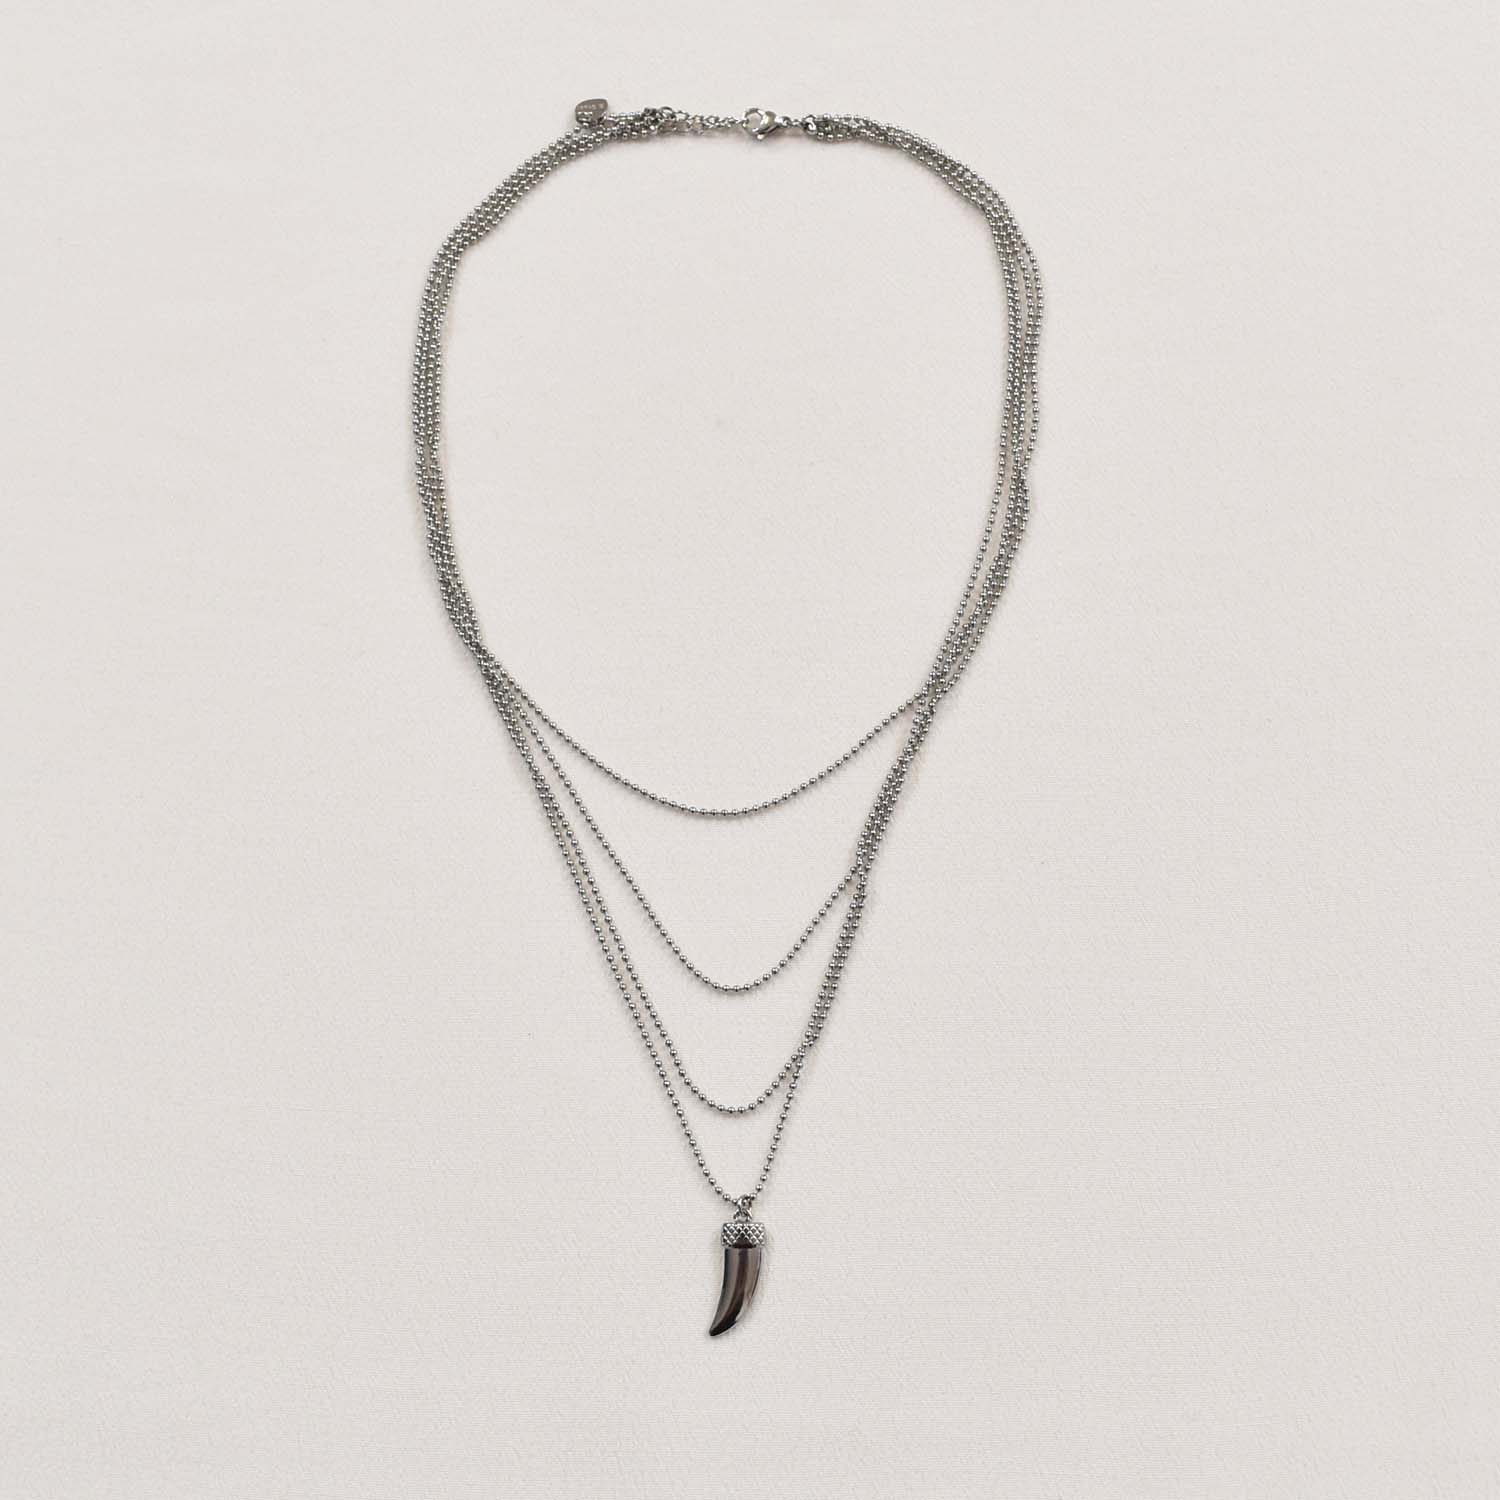 Horn chains necklace 